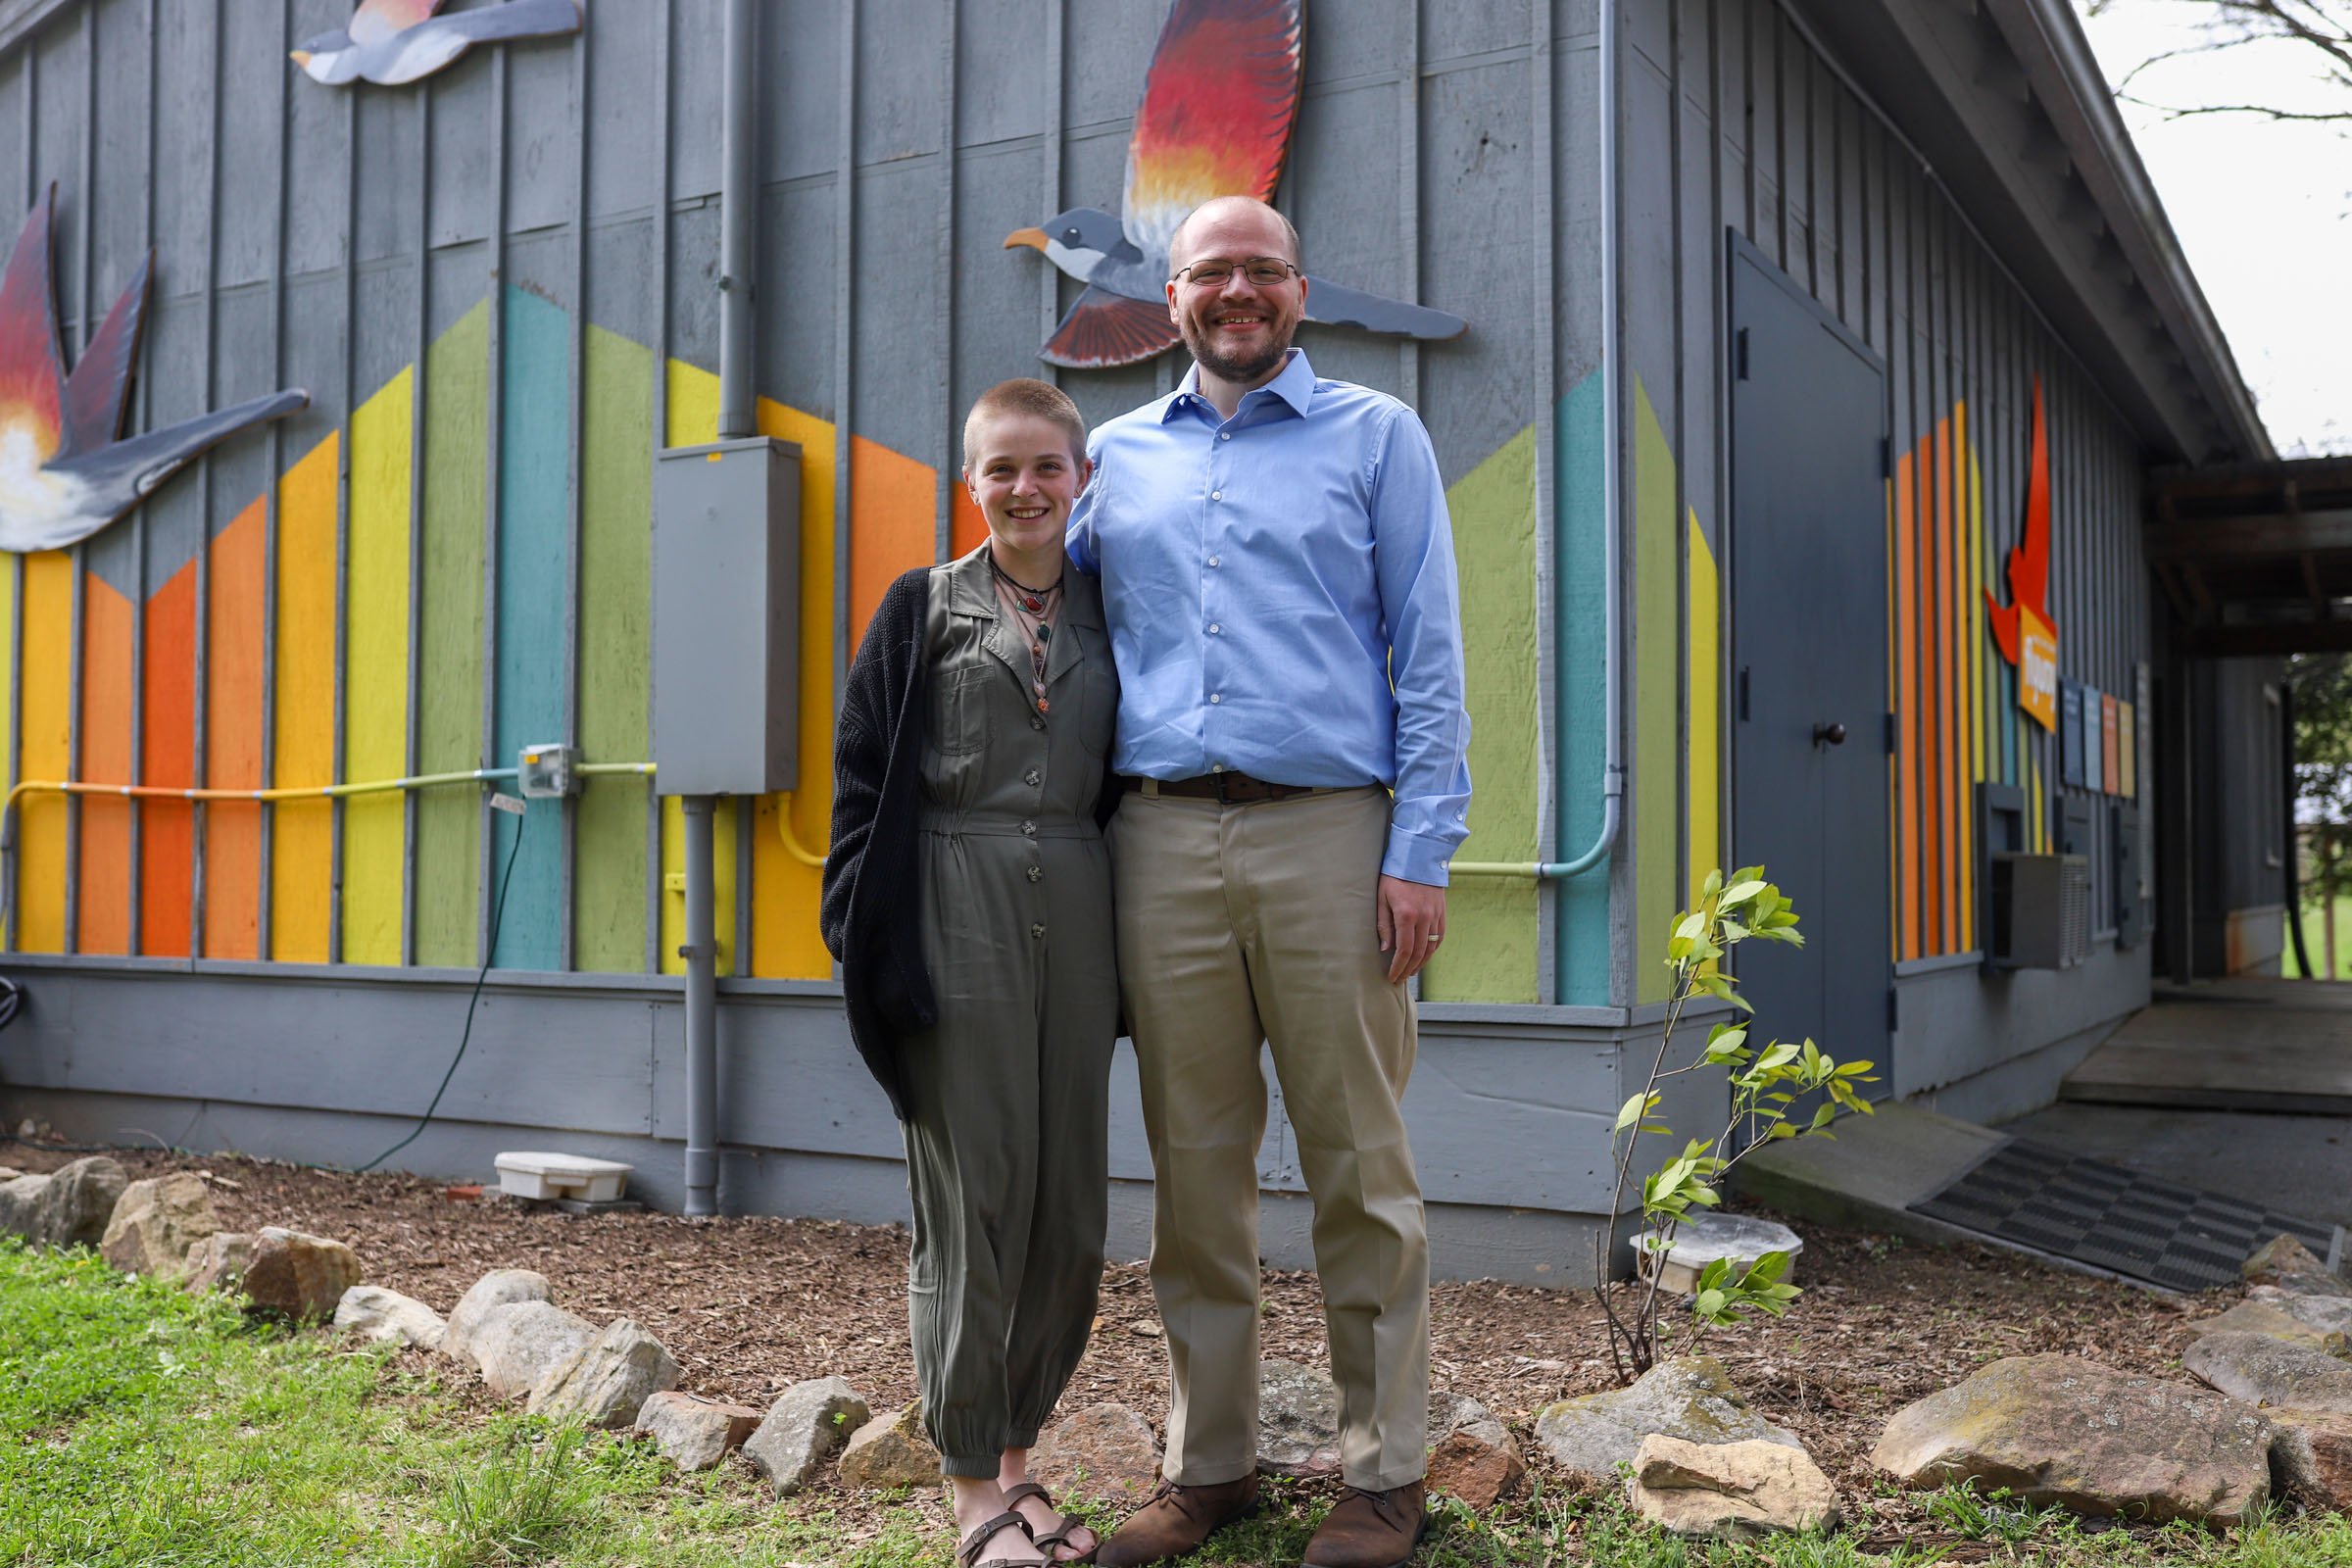  Staff photo by Olivia Ross  / Gus Gaston, one of the artists, stands with Graphic Design professor Derek Witucki at the sight of the new mural, "Reflection Flyaway," at Reflection Riding Arboretum and Nature Center on April 7, 2022. The mural was cr